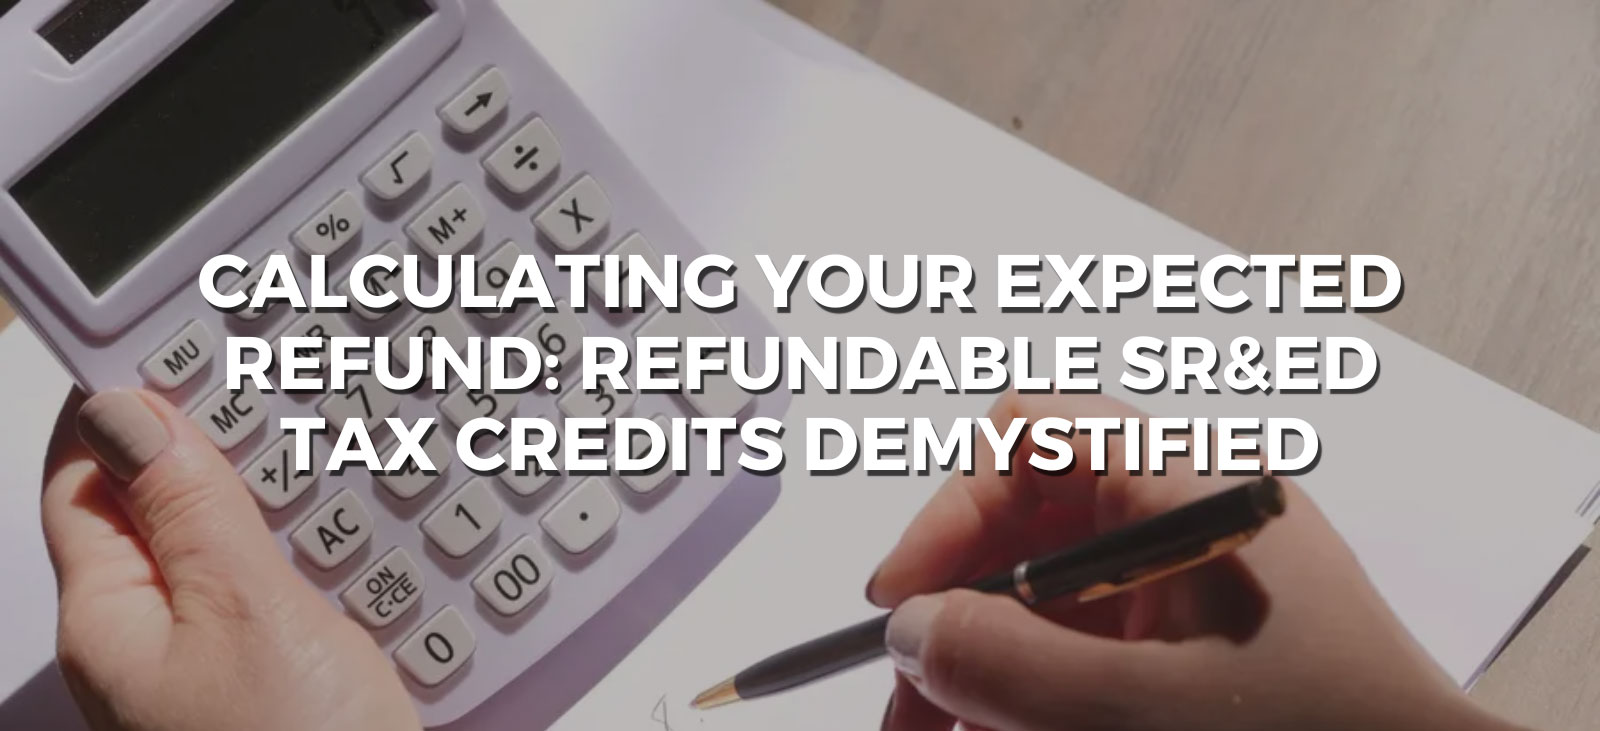 calculating your expected refund sr&ed